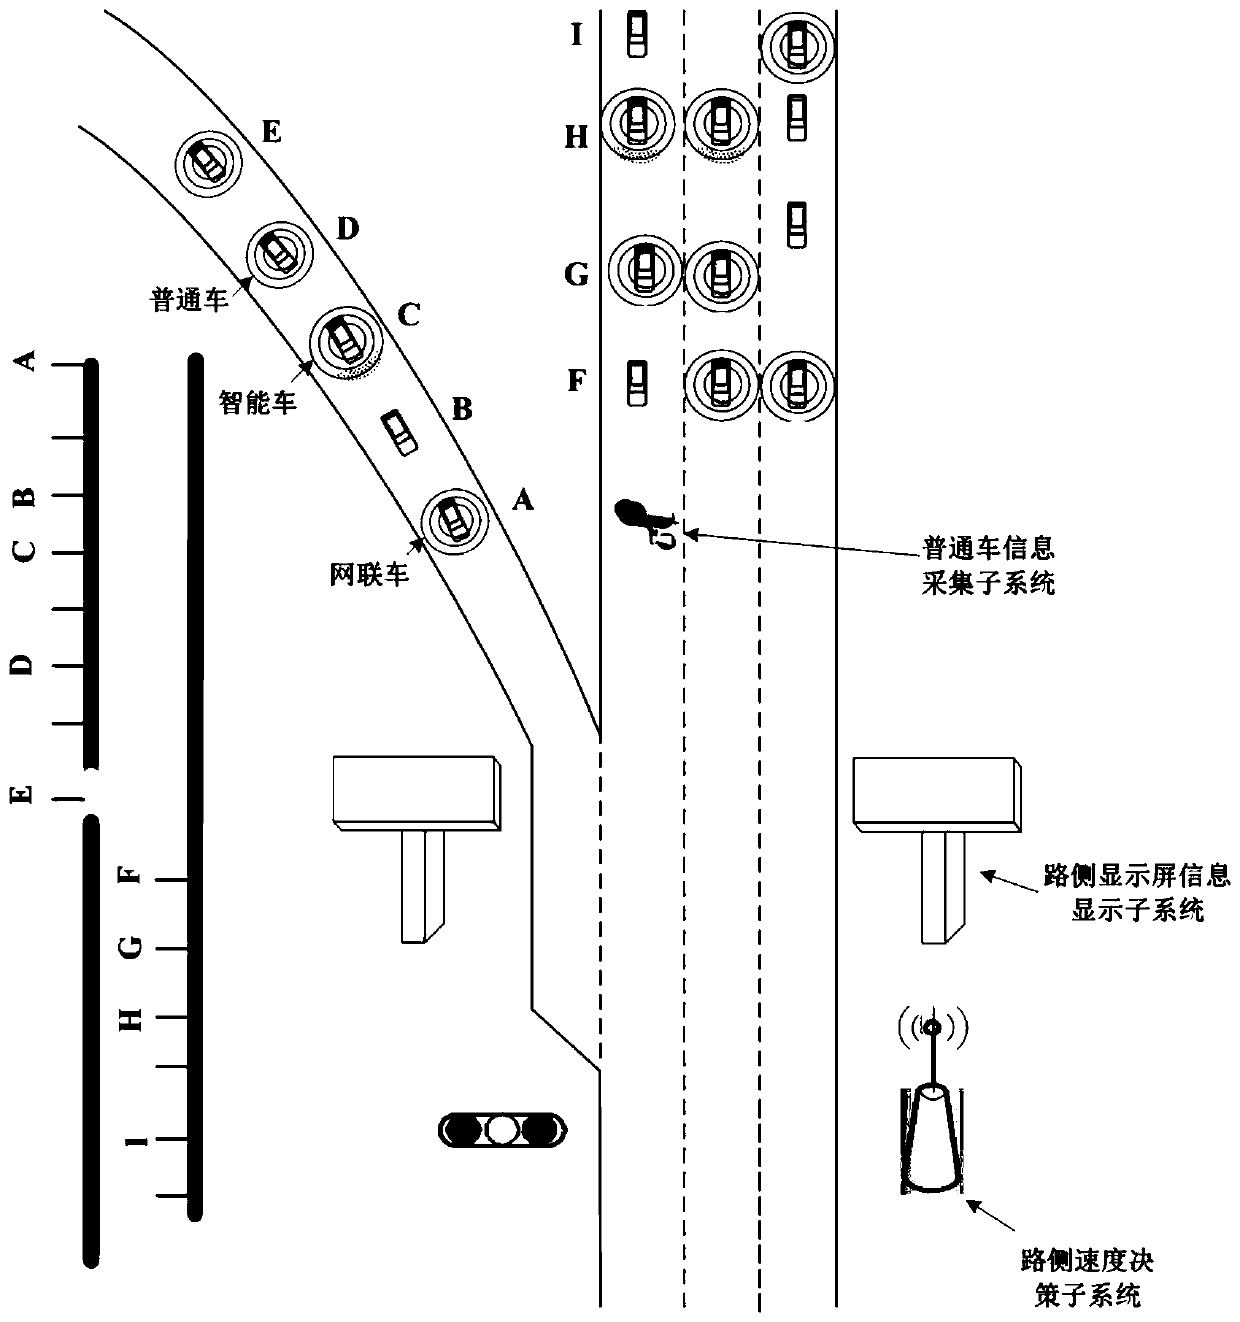 Highway entrance ramp heterogeneous traffic flow vehicle speed guiding system and guiding method